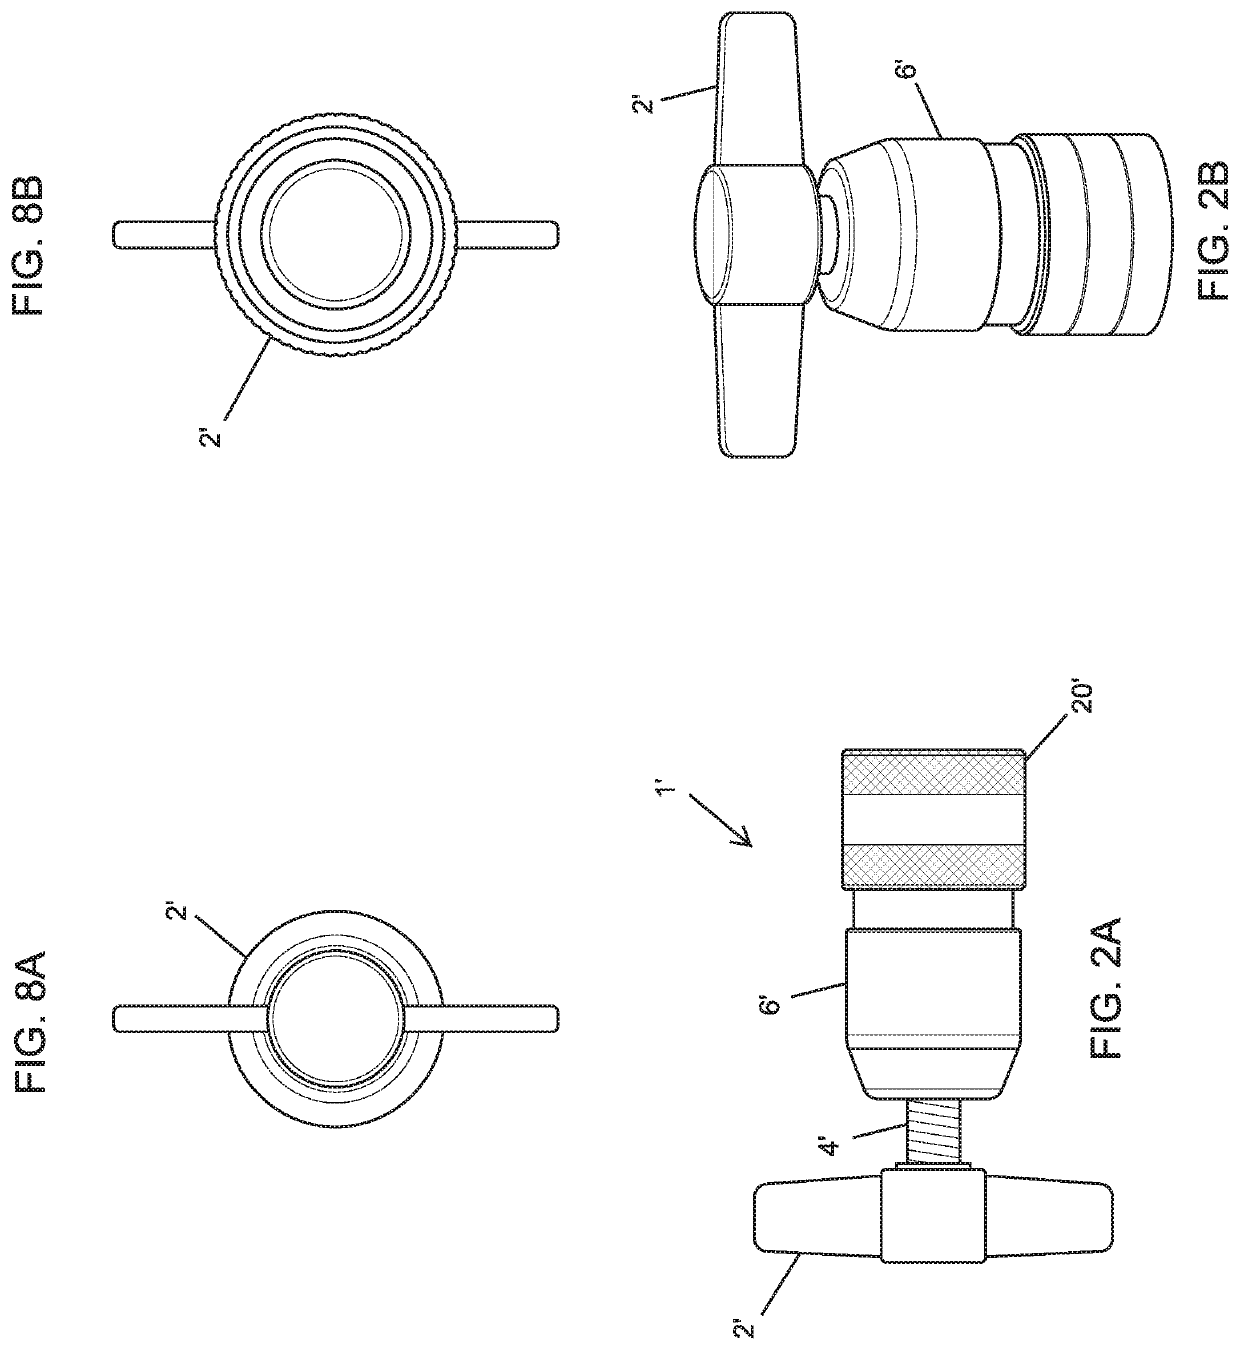 Device for preventing refrigerant leaks in air conditioning system service ports